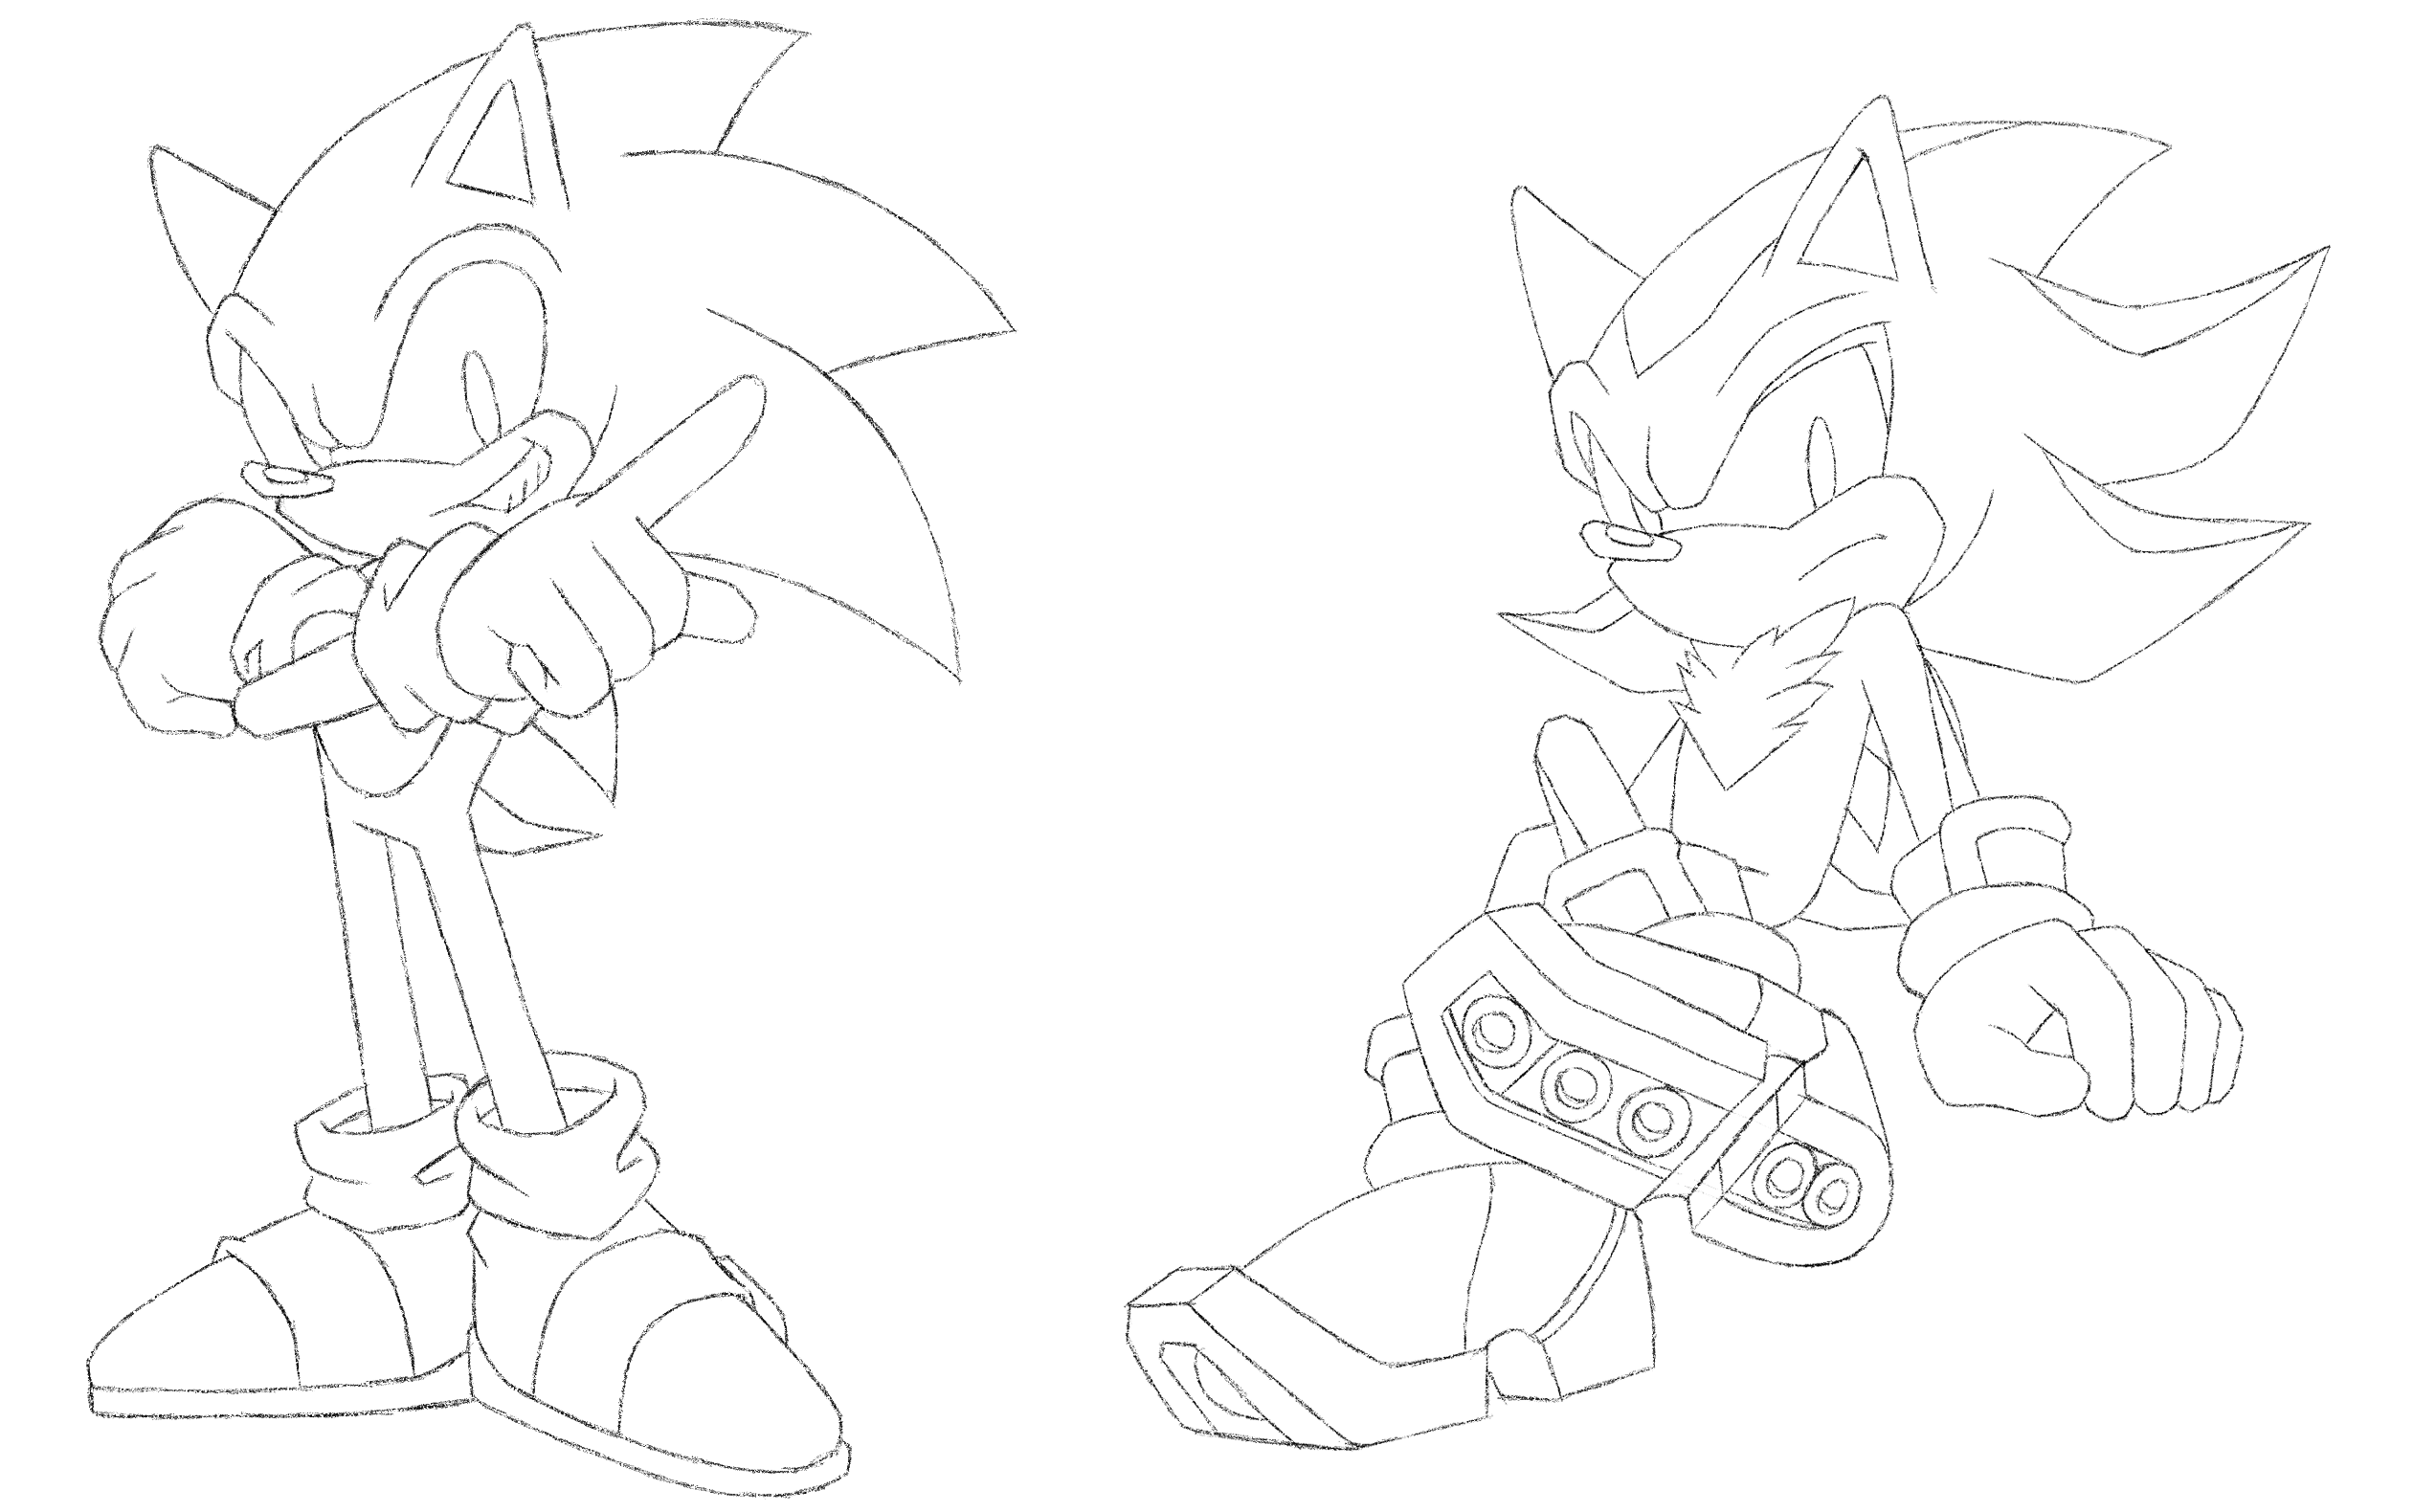 Sonic and shadow sketch by skcollabs on